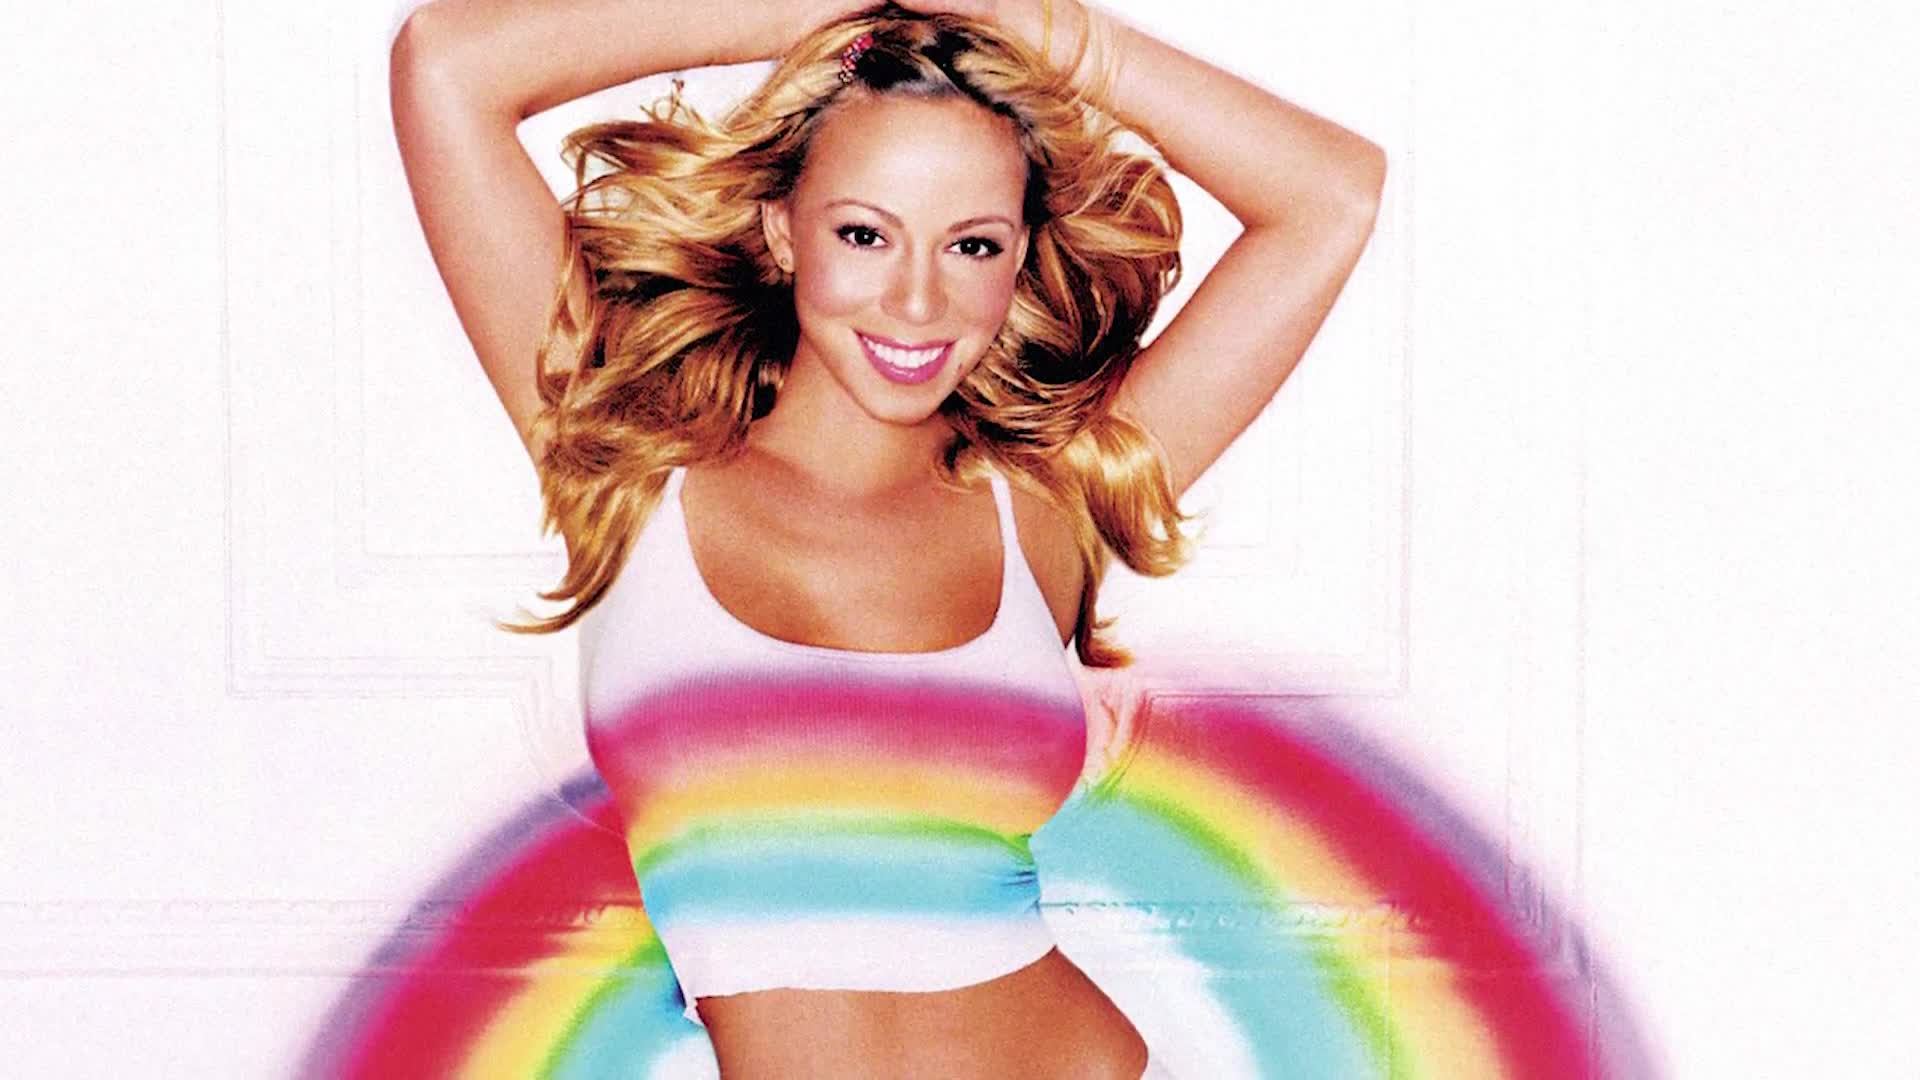 dennis mckelvy recommends mariah carey half naked pic